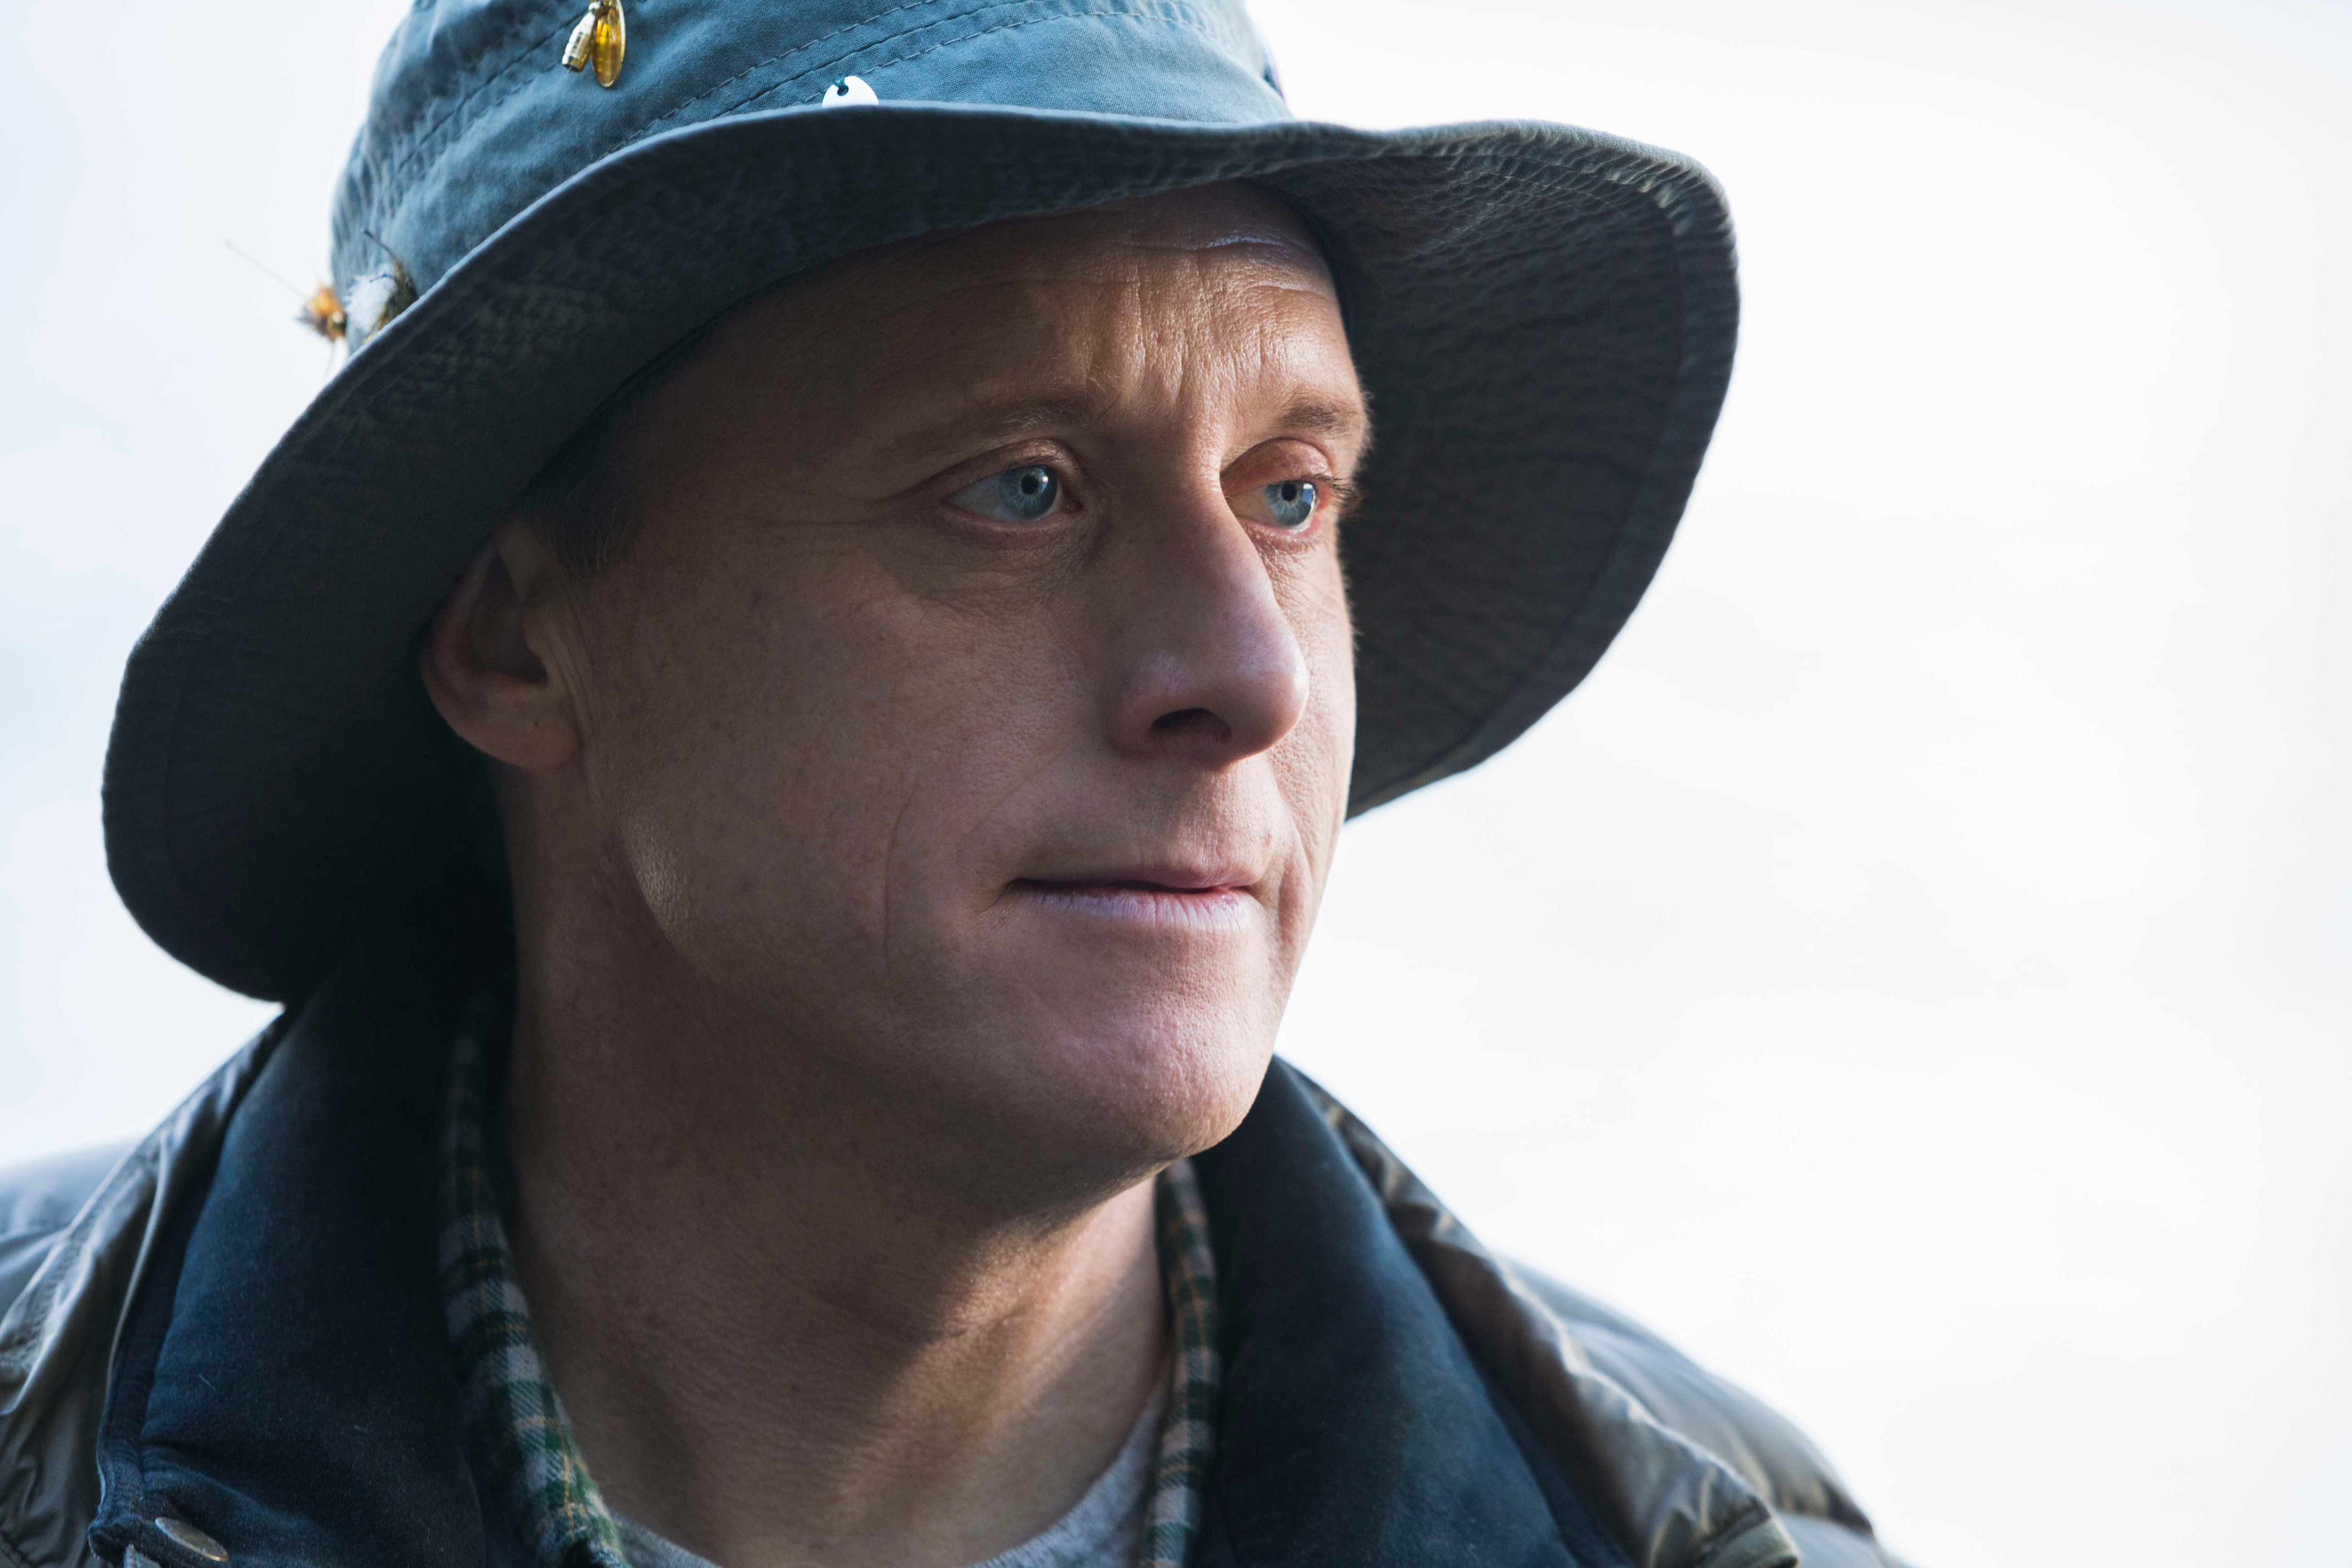 Resident Alien's Alan Tudyk on why he's 'the right flavor of odd' to